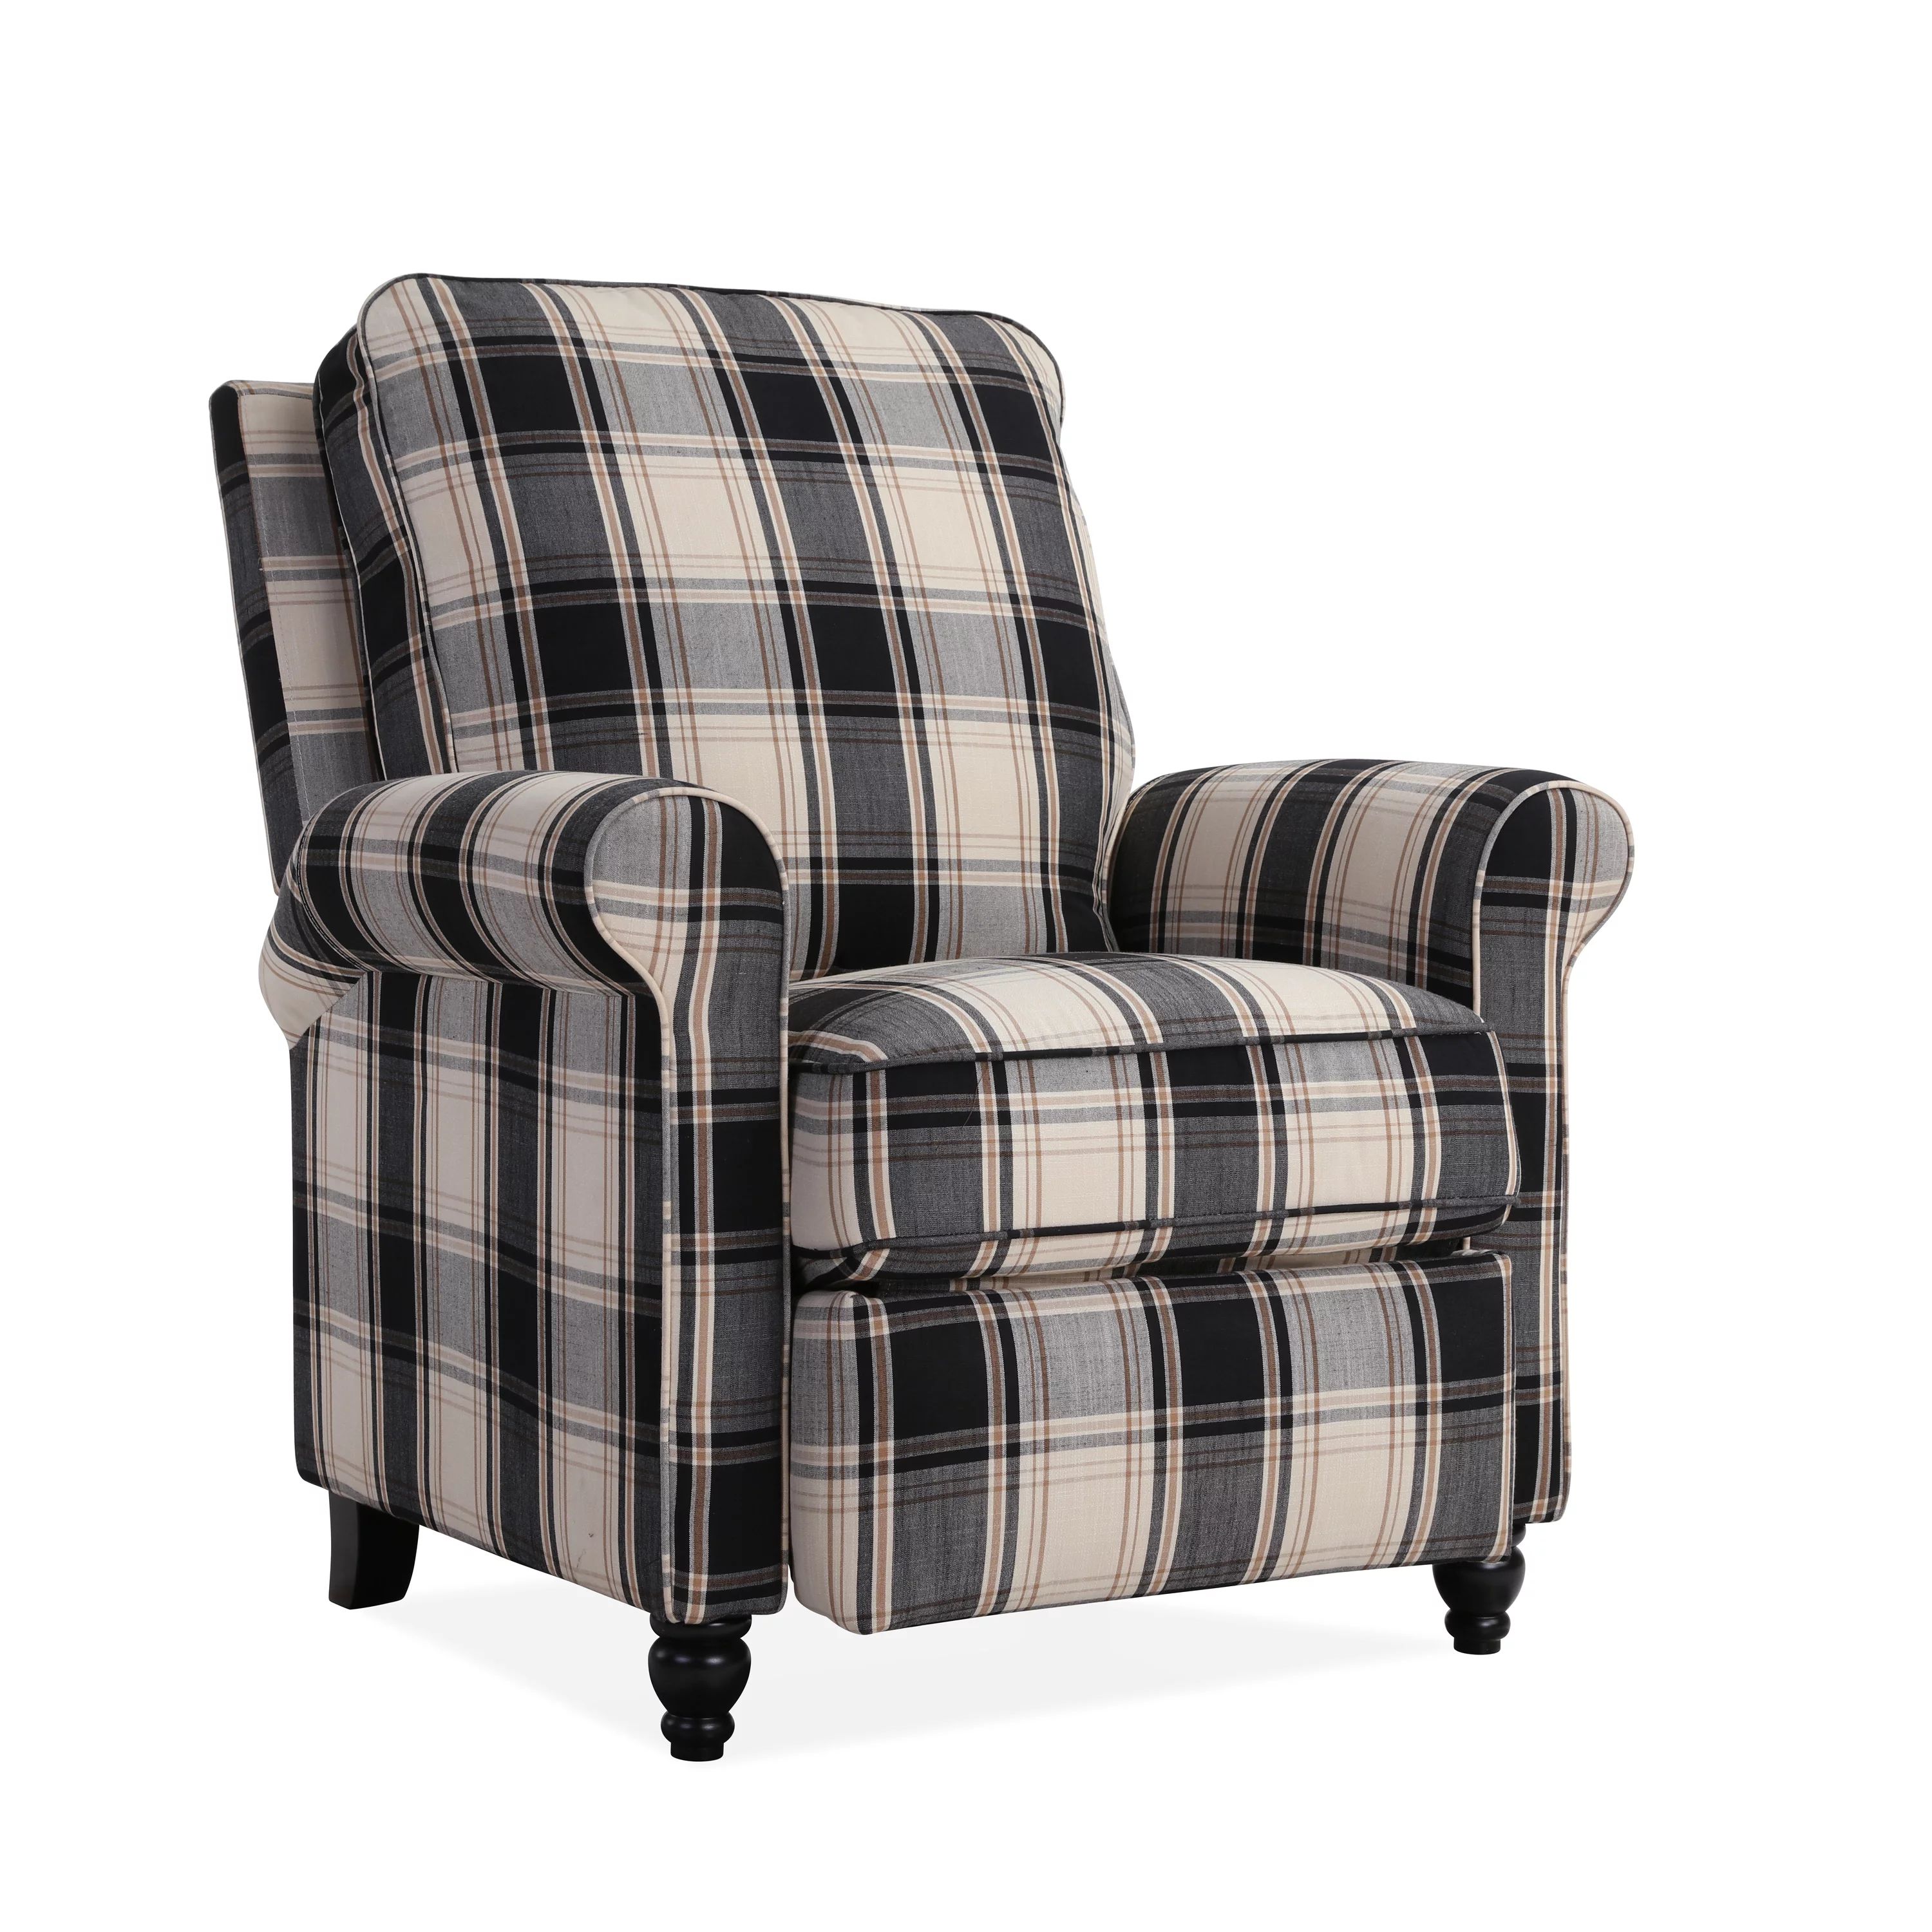 Homesvale Lincoln Push Back Recliner Chair in Brown and Black Plaid | Walmart (US)